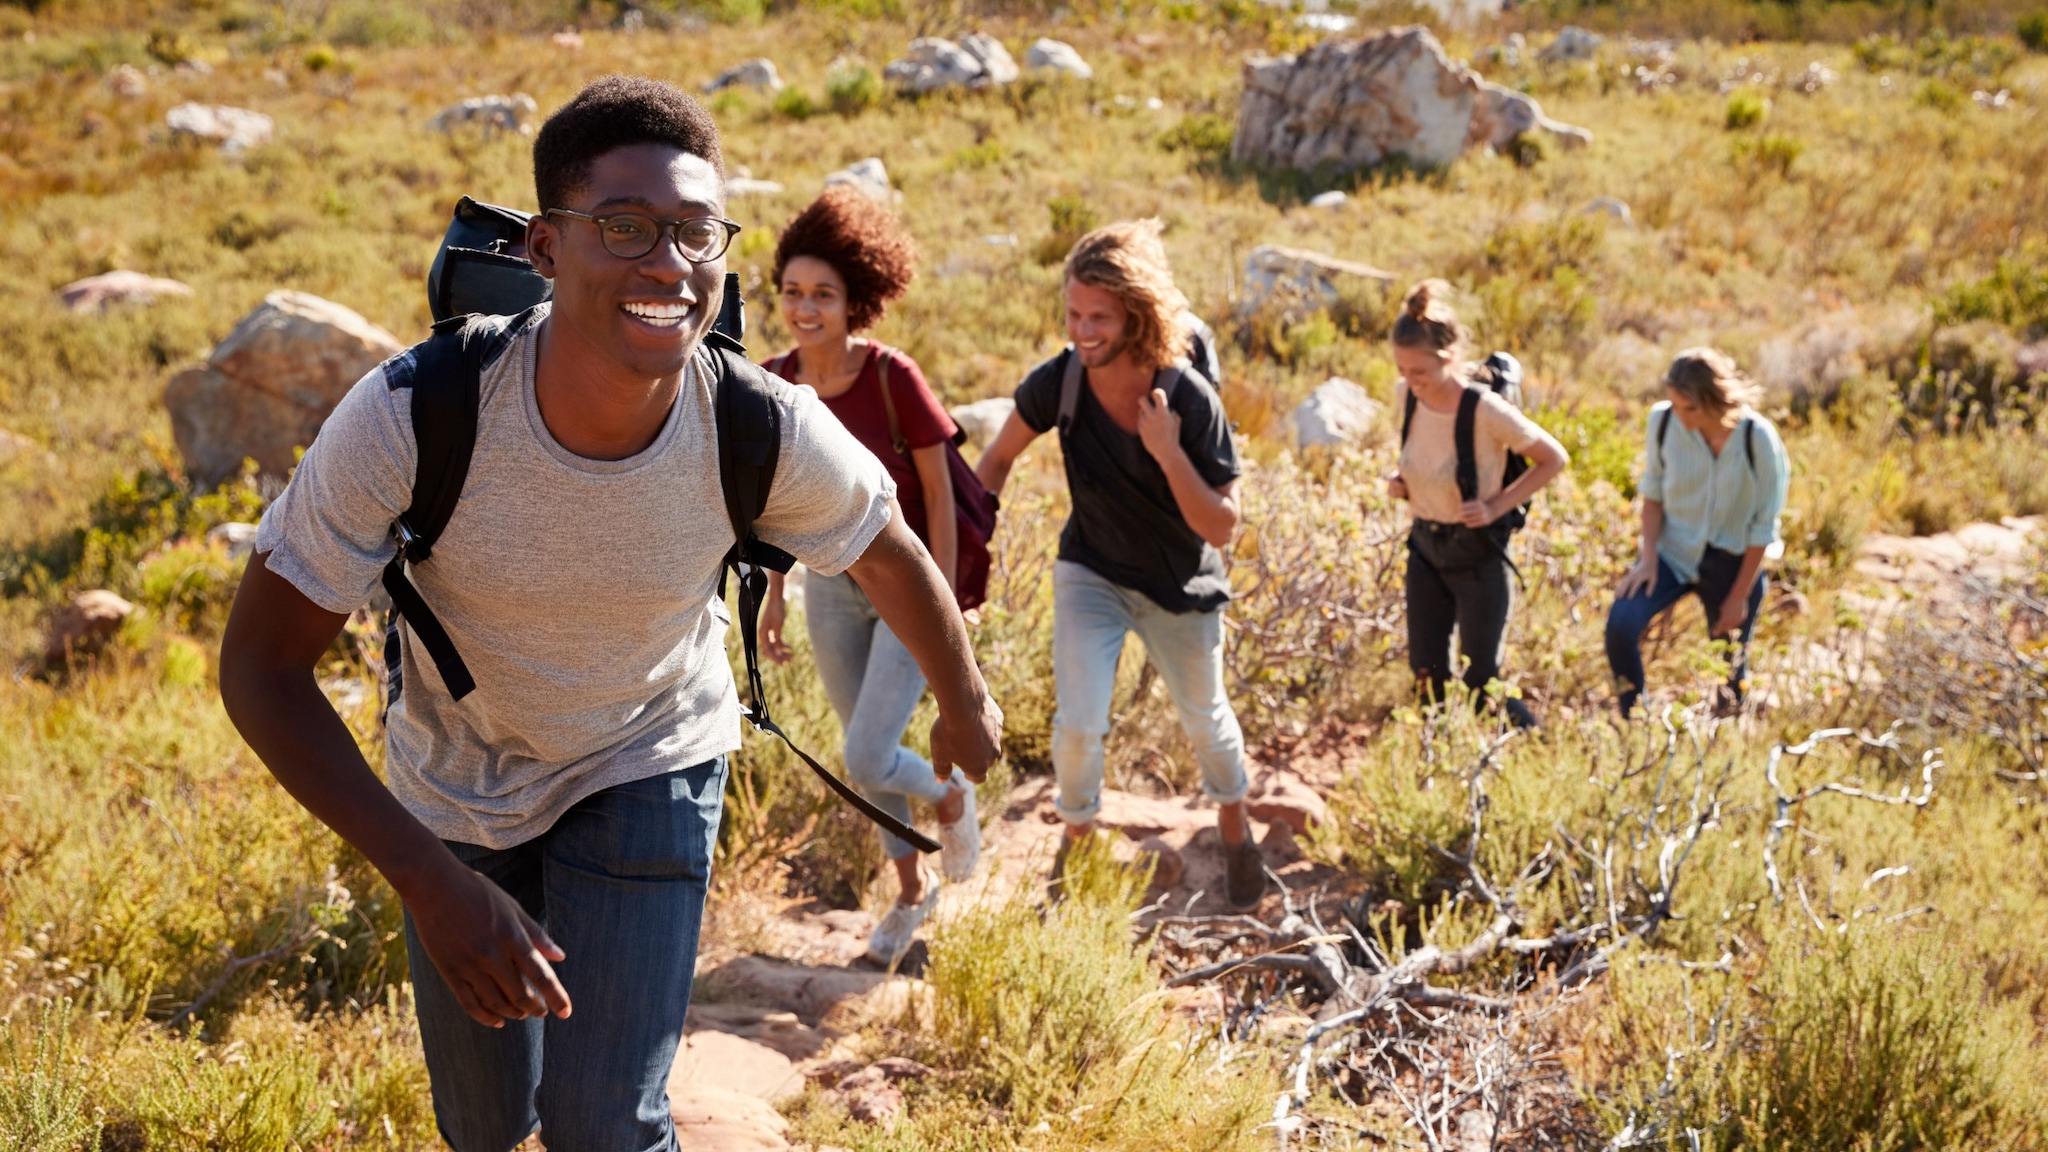 A smiling black man leads a group of friends up a trail.